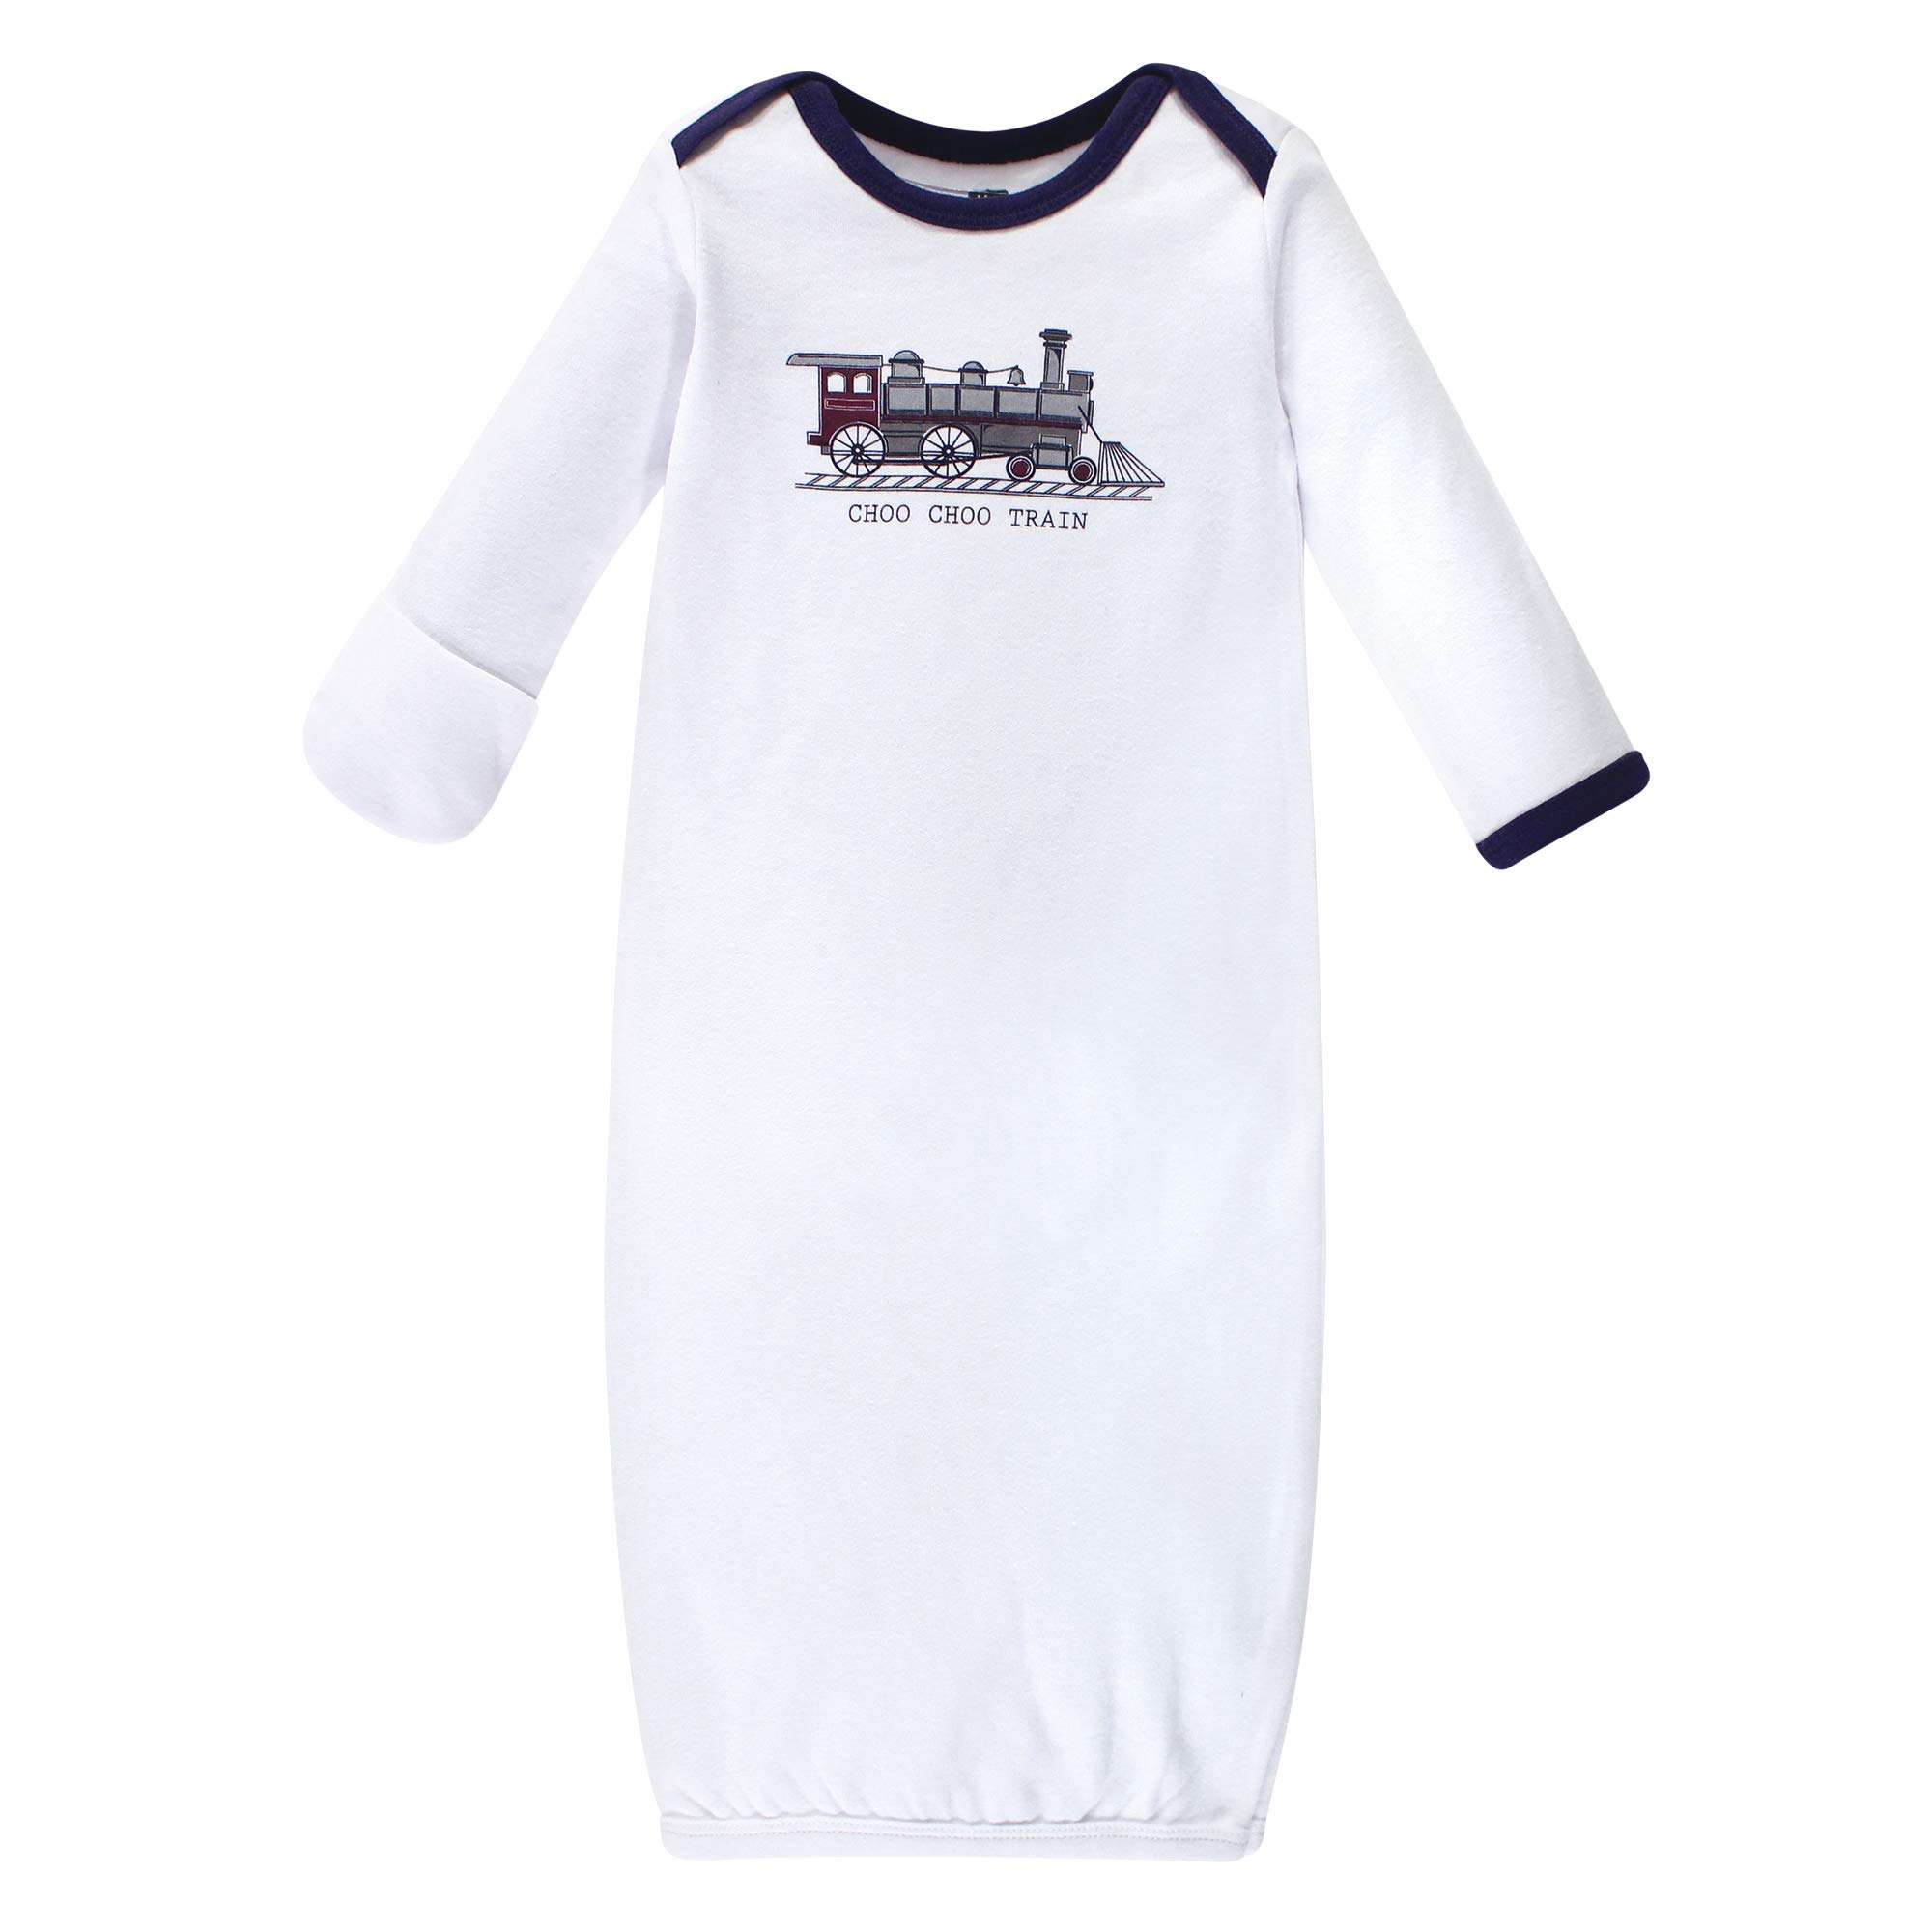 Hudson Baby Baby Girls' Cotton Gowns